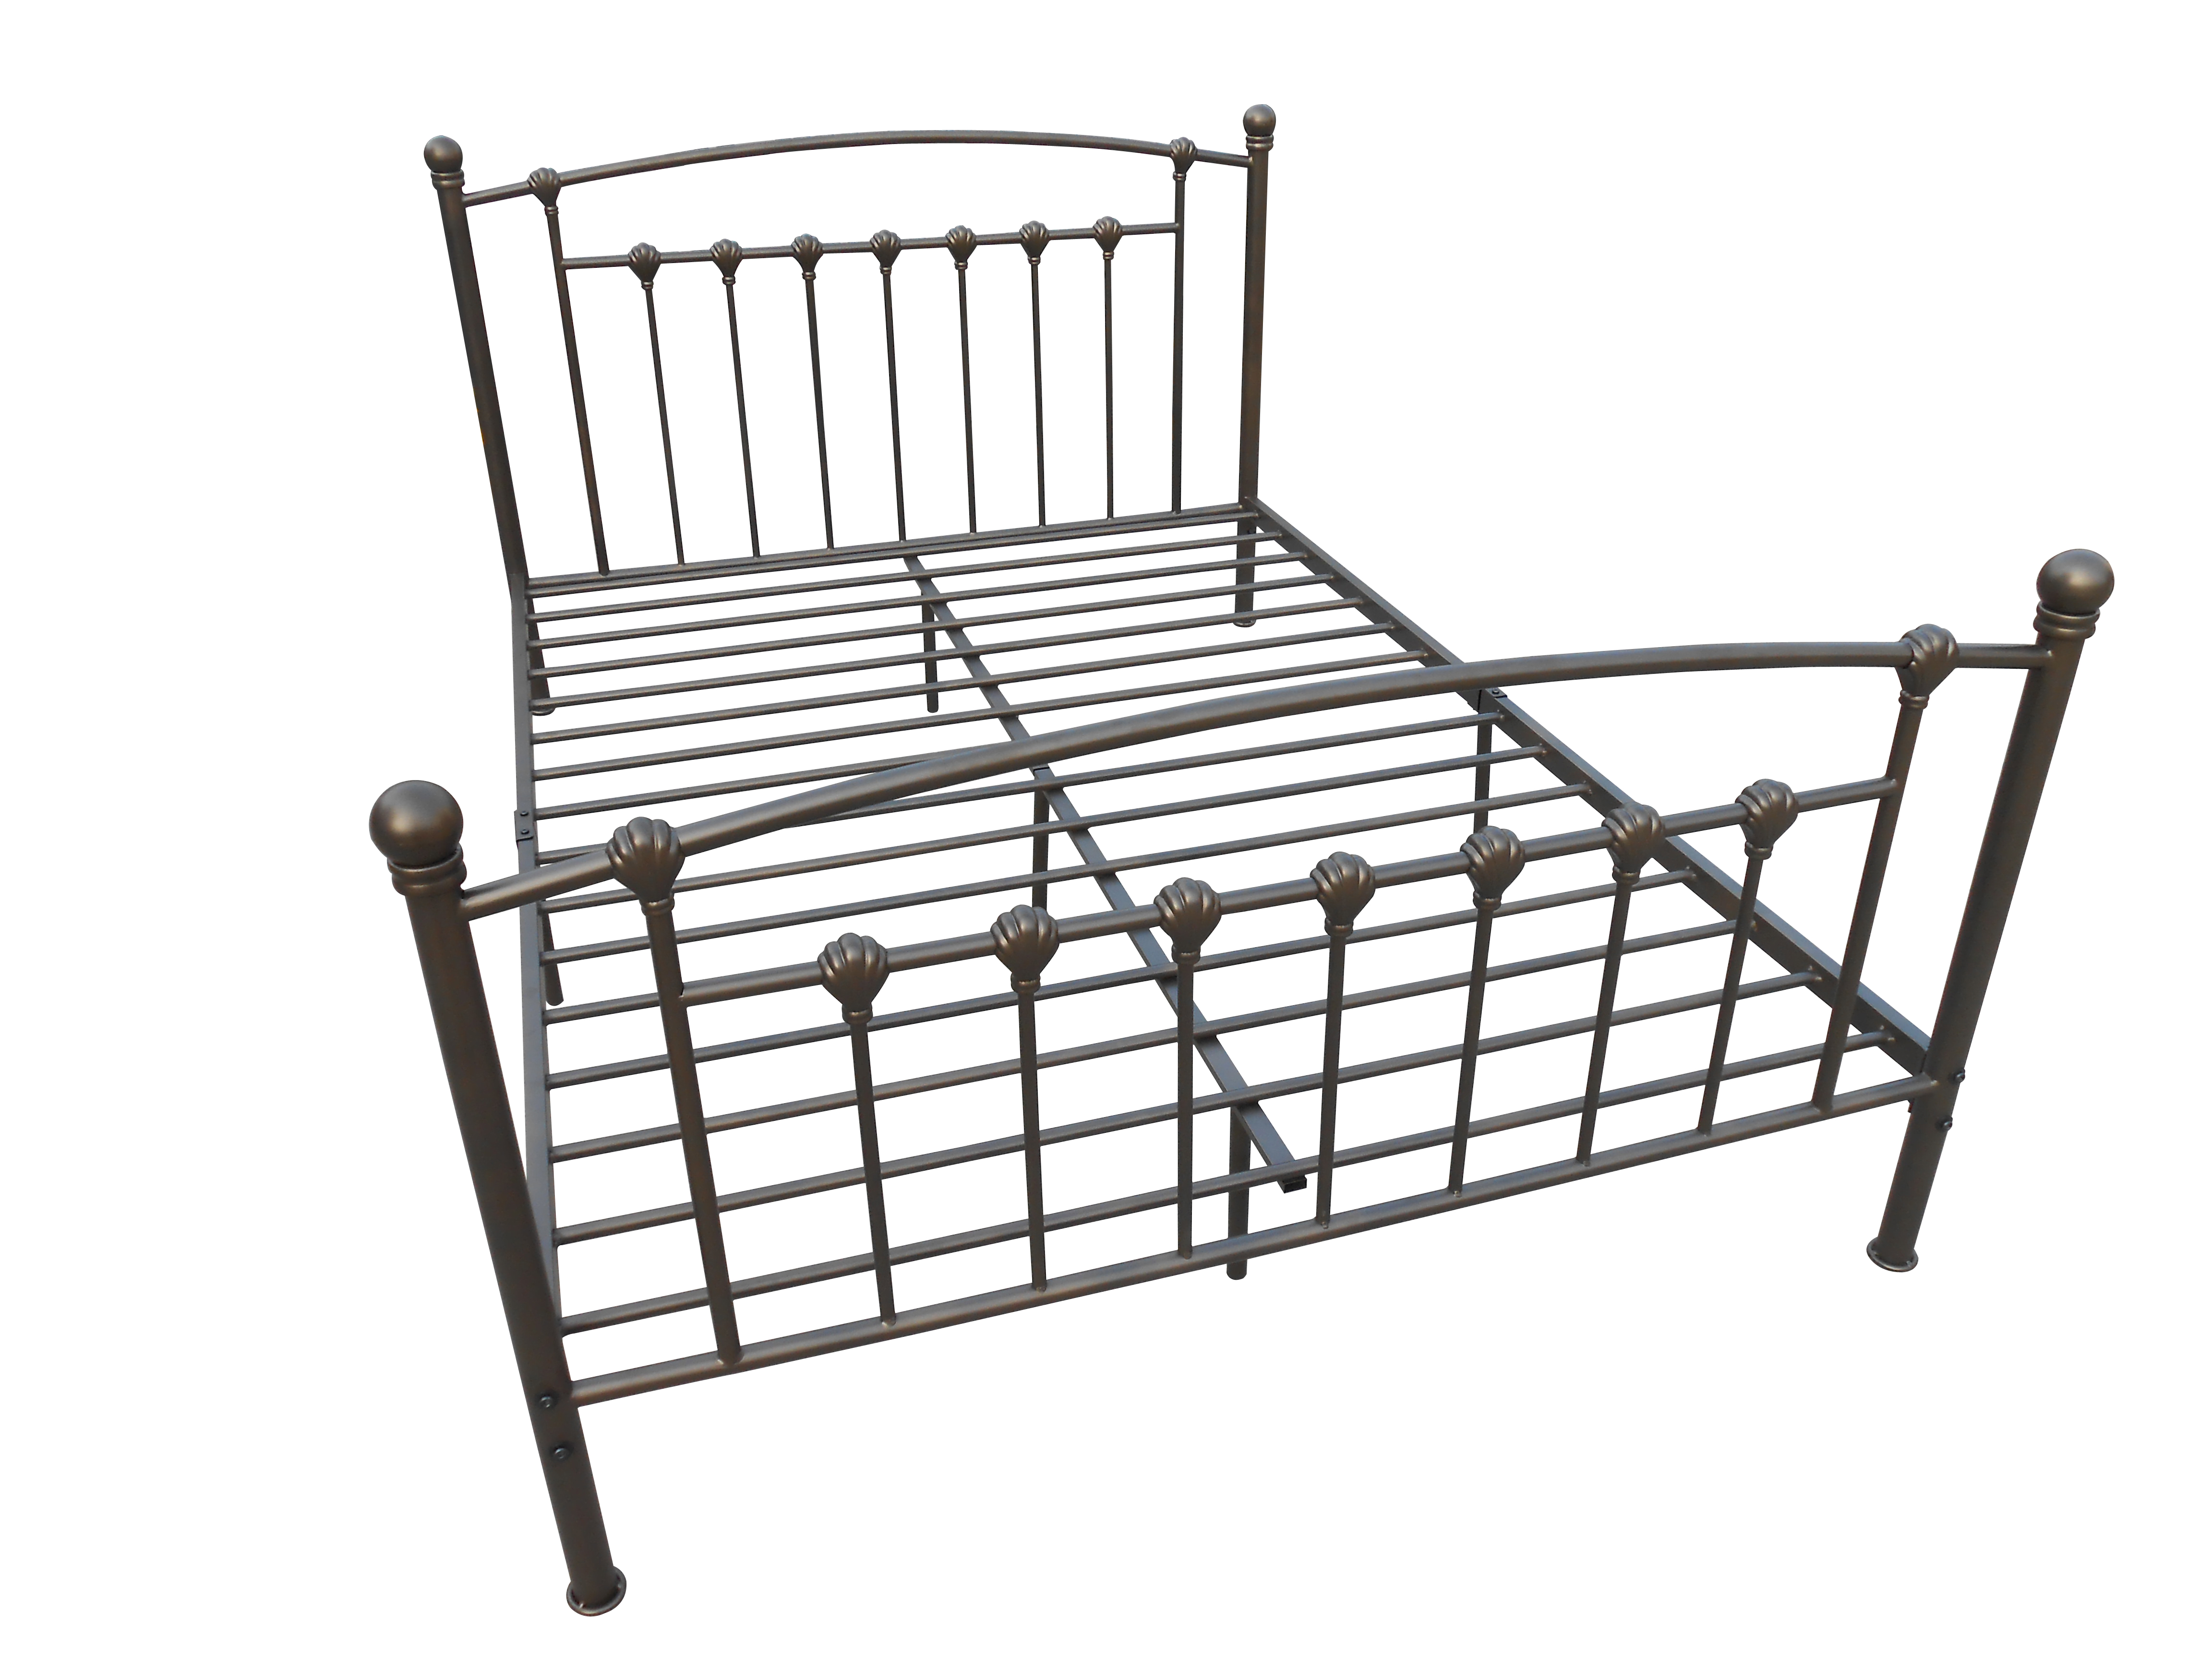 BD-1103 metal bed Featured Image